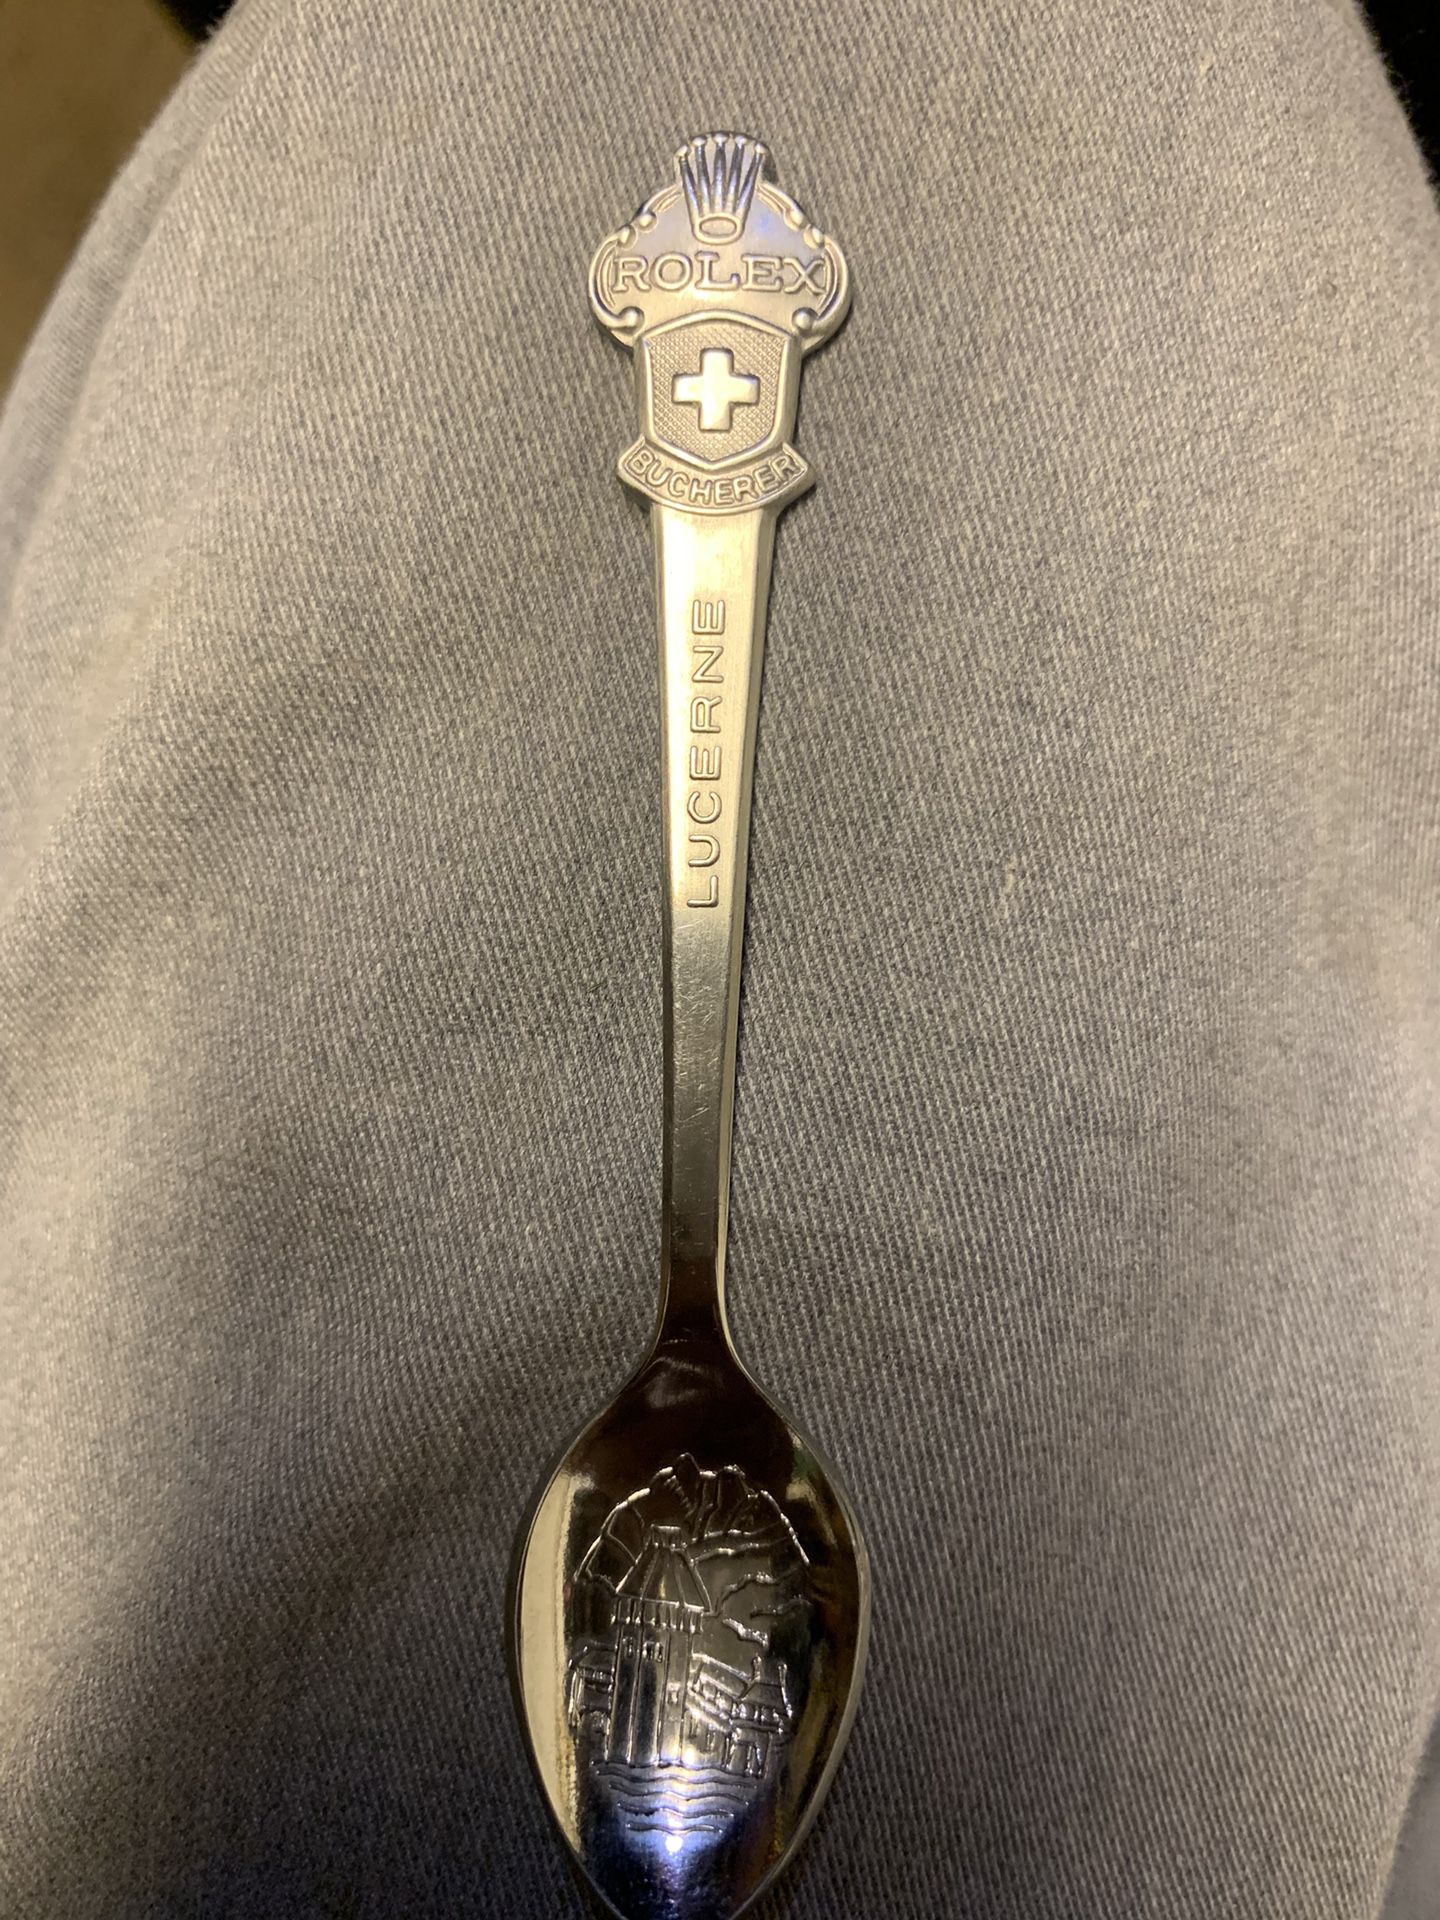 Rare Authentic ROLEX WATCH Collectible Silver Spoon